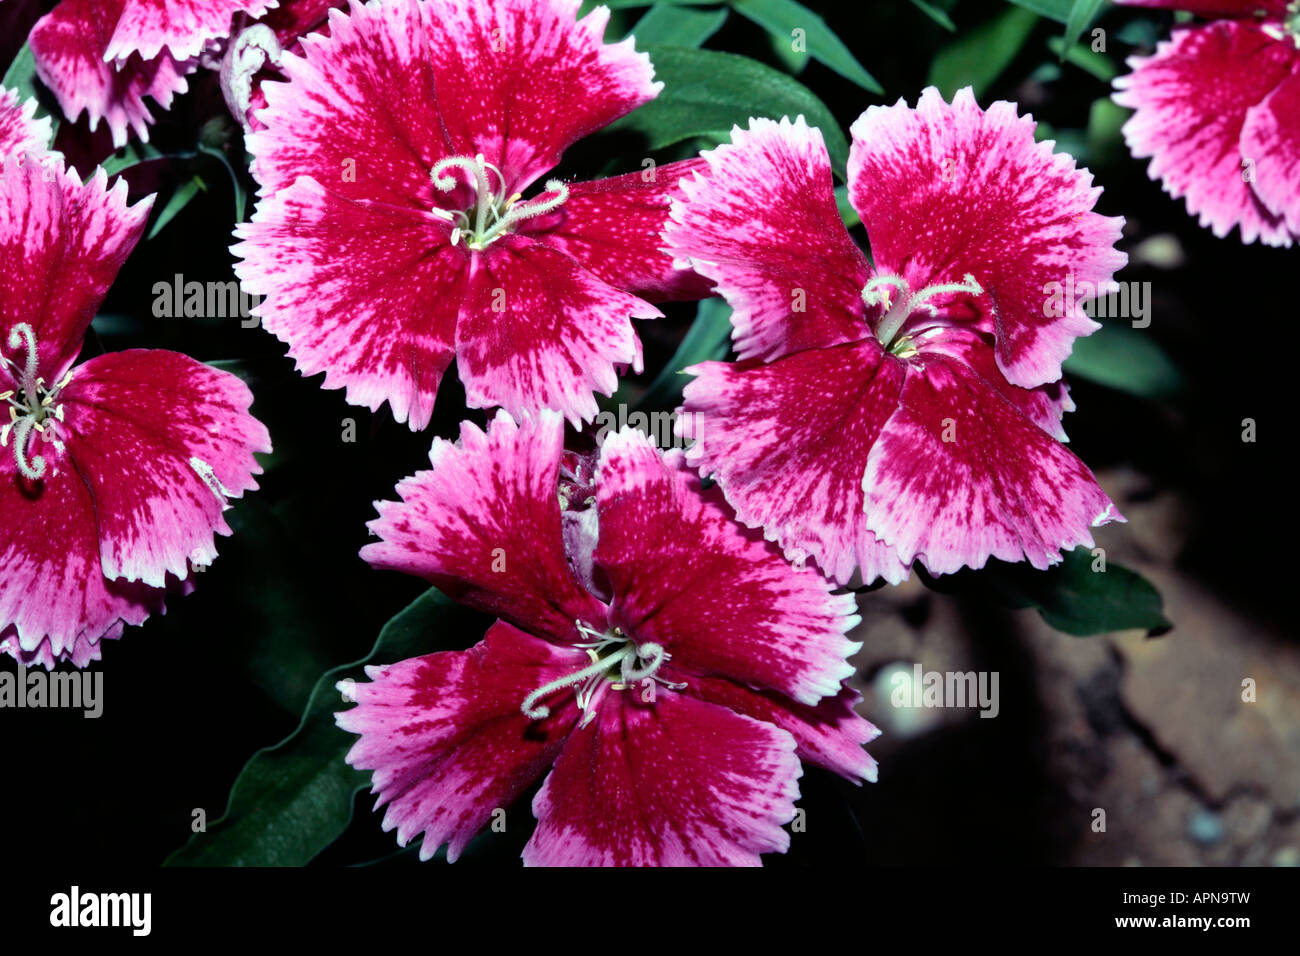 Carnation/Pink- Dianthus cultivar- Family Caryophyllaceae Stock Photo